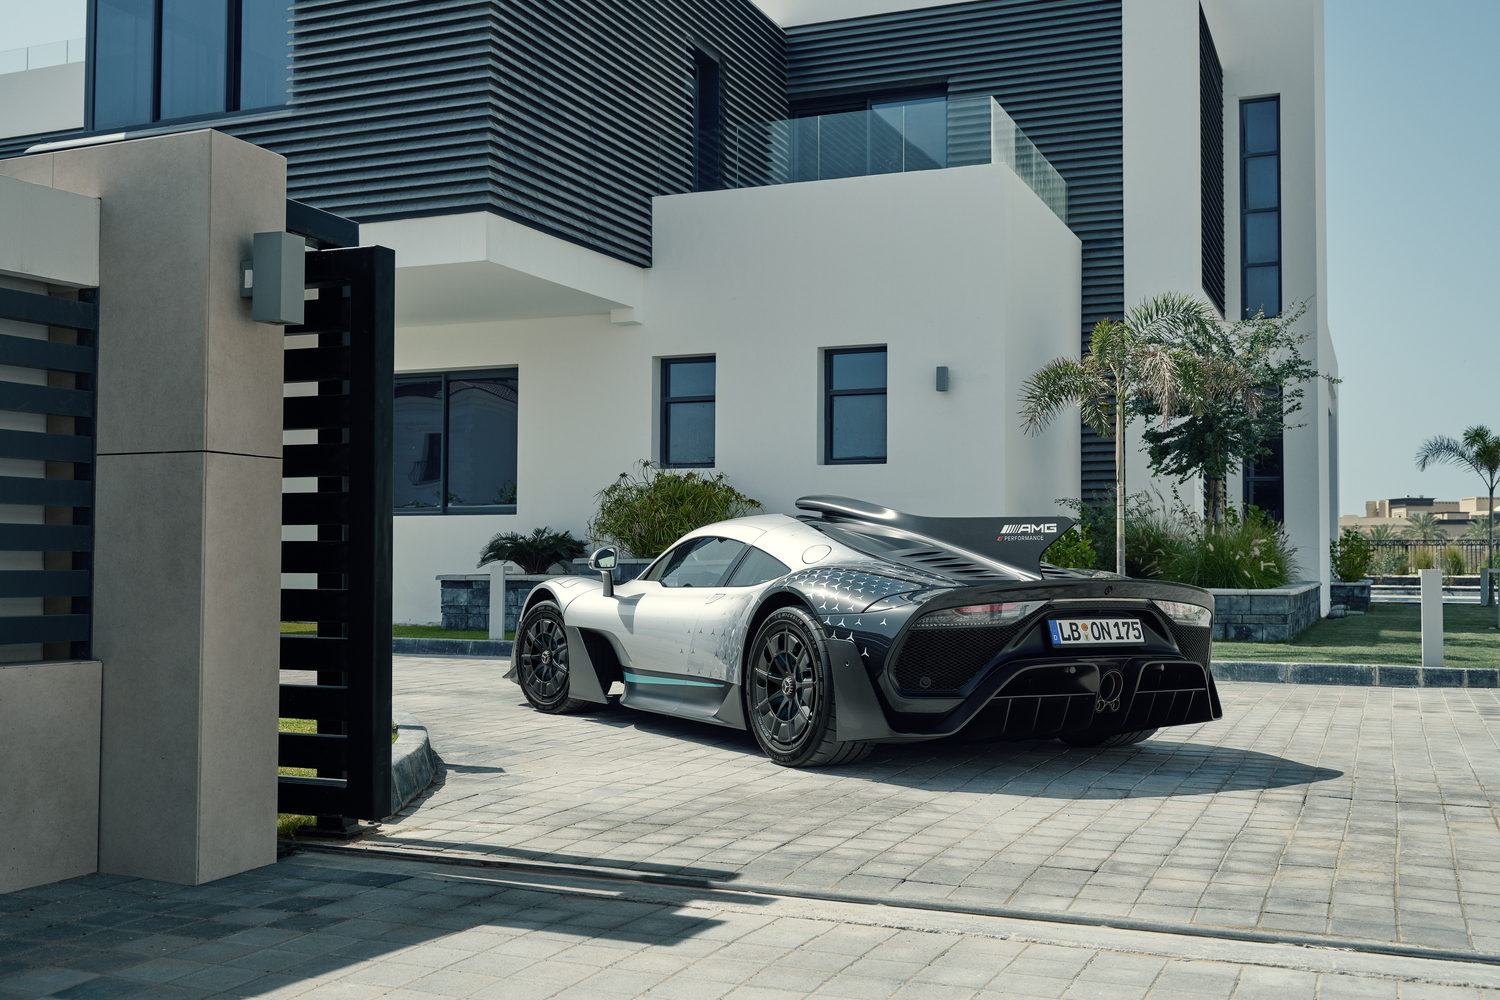 Mercedes-AMG One is a 1,063hp F1-inspired hybrid